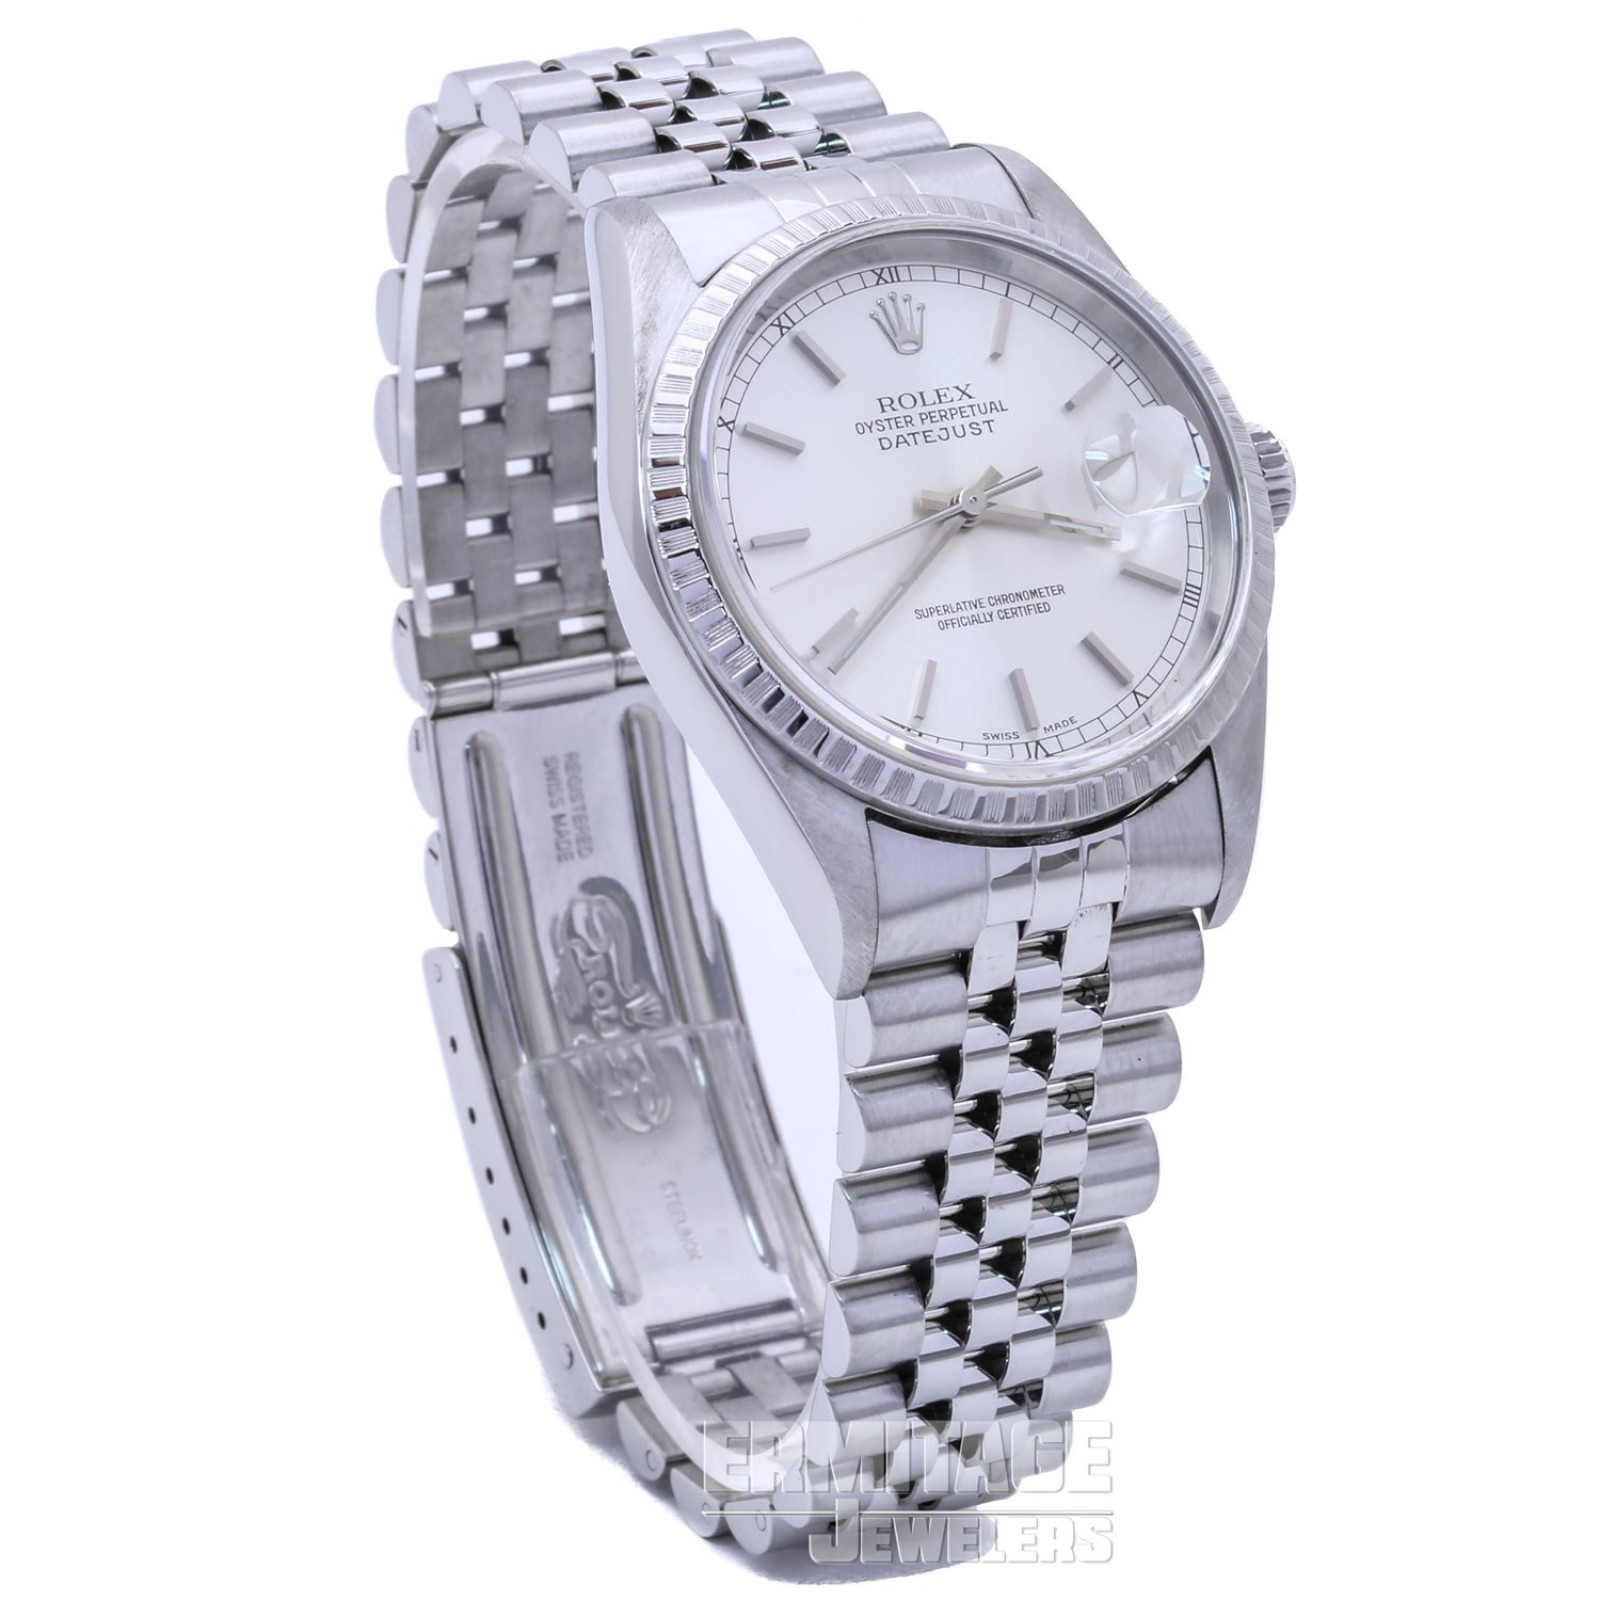 Rolex Datejust 16220 with Steel Dial